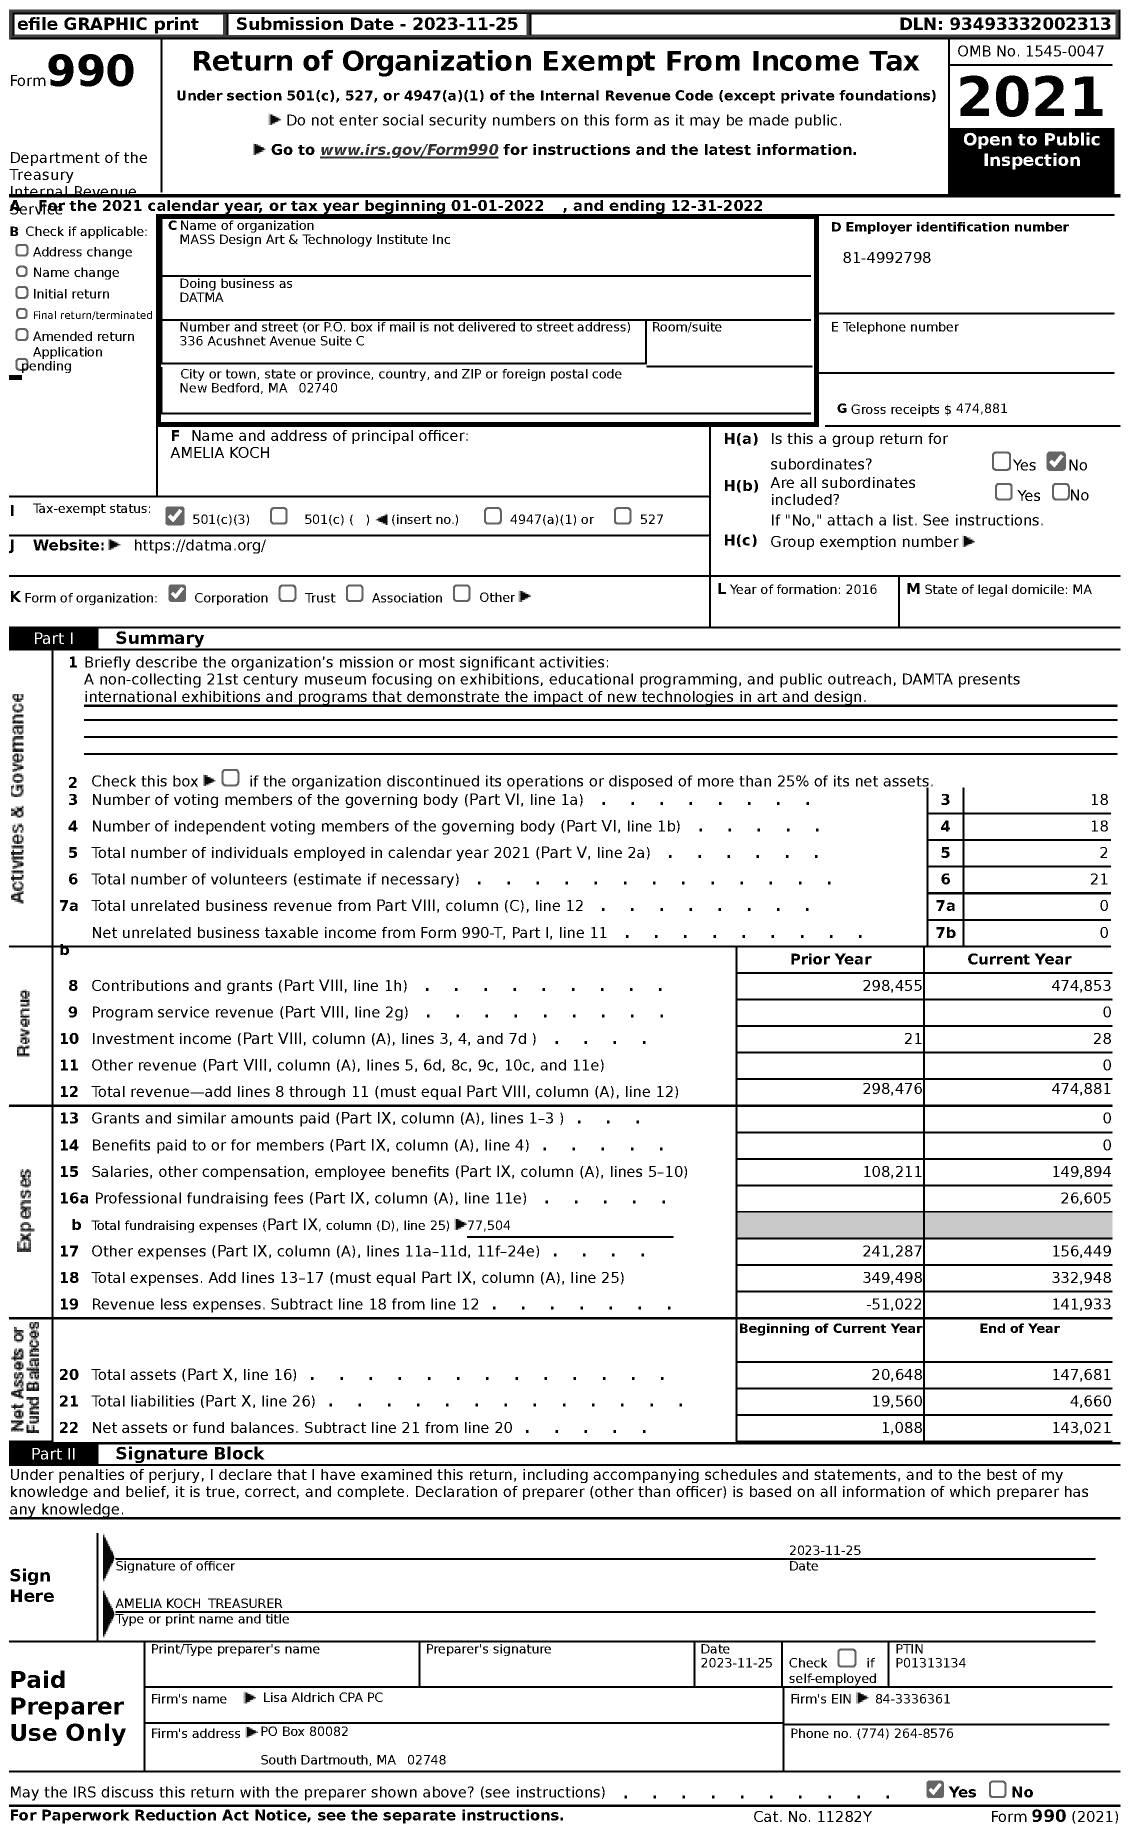 Image of first page of 2022 Form 990 for Datma